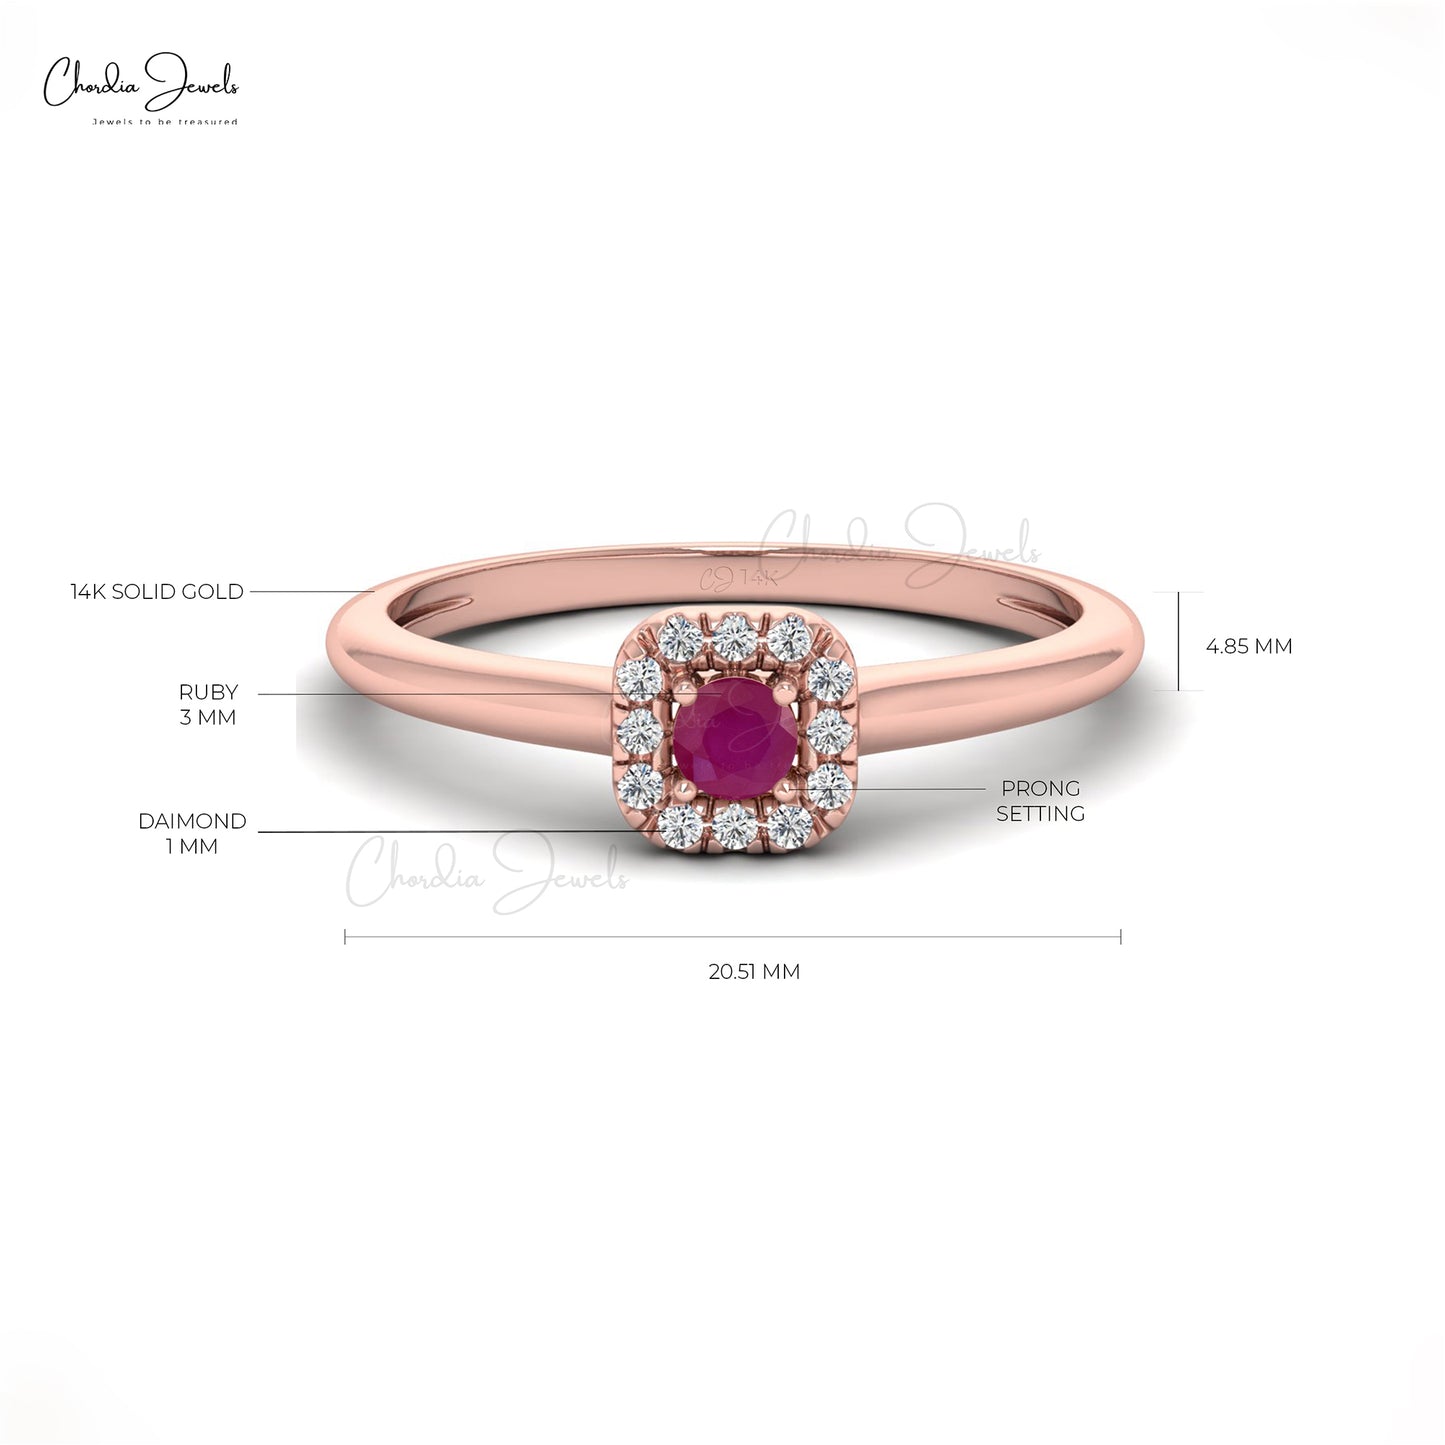 Load image into Gallery viewer, Delicate Red Ruby Halo Ring 3mm Round Cut Natural Gemstone Ring 14k Real Gold Diamond Minimal Hallmarked Wedding Jewelry
